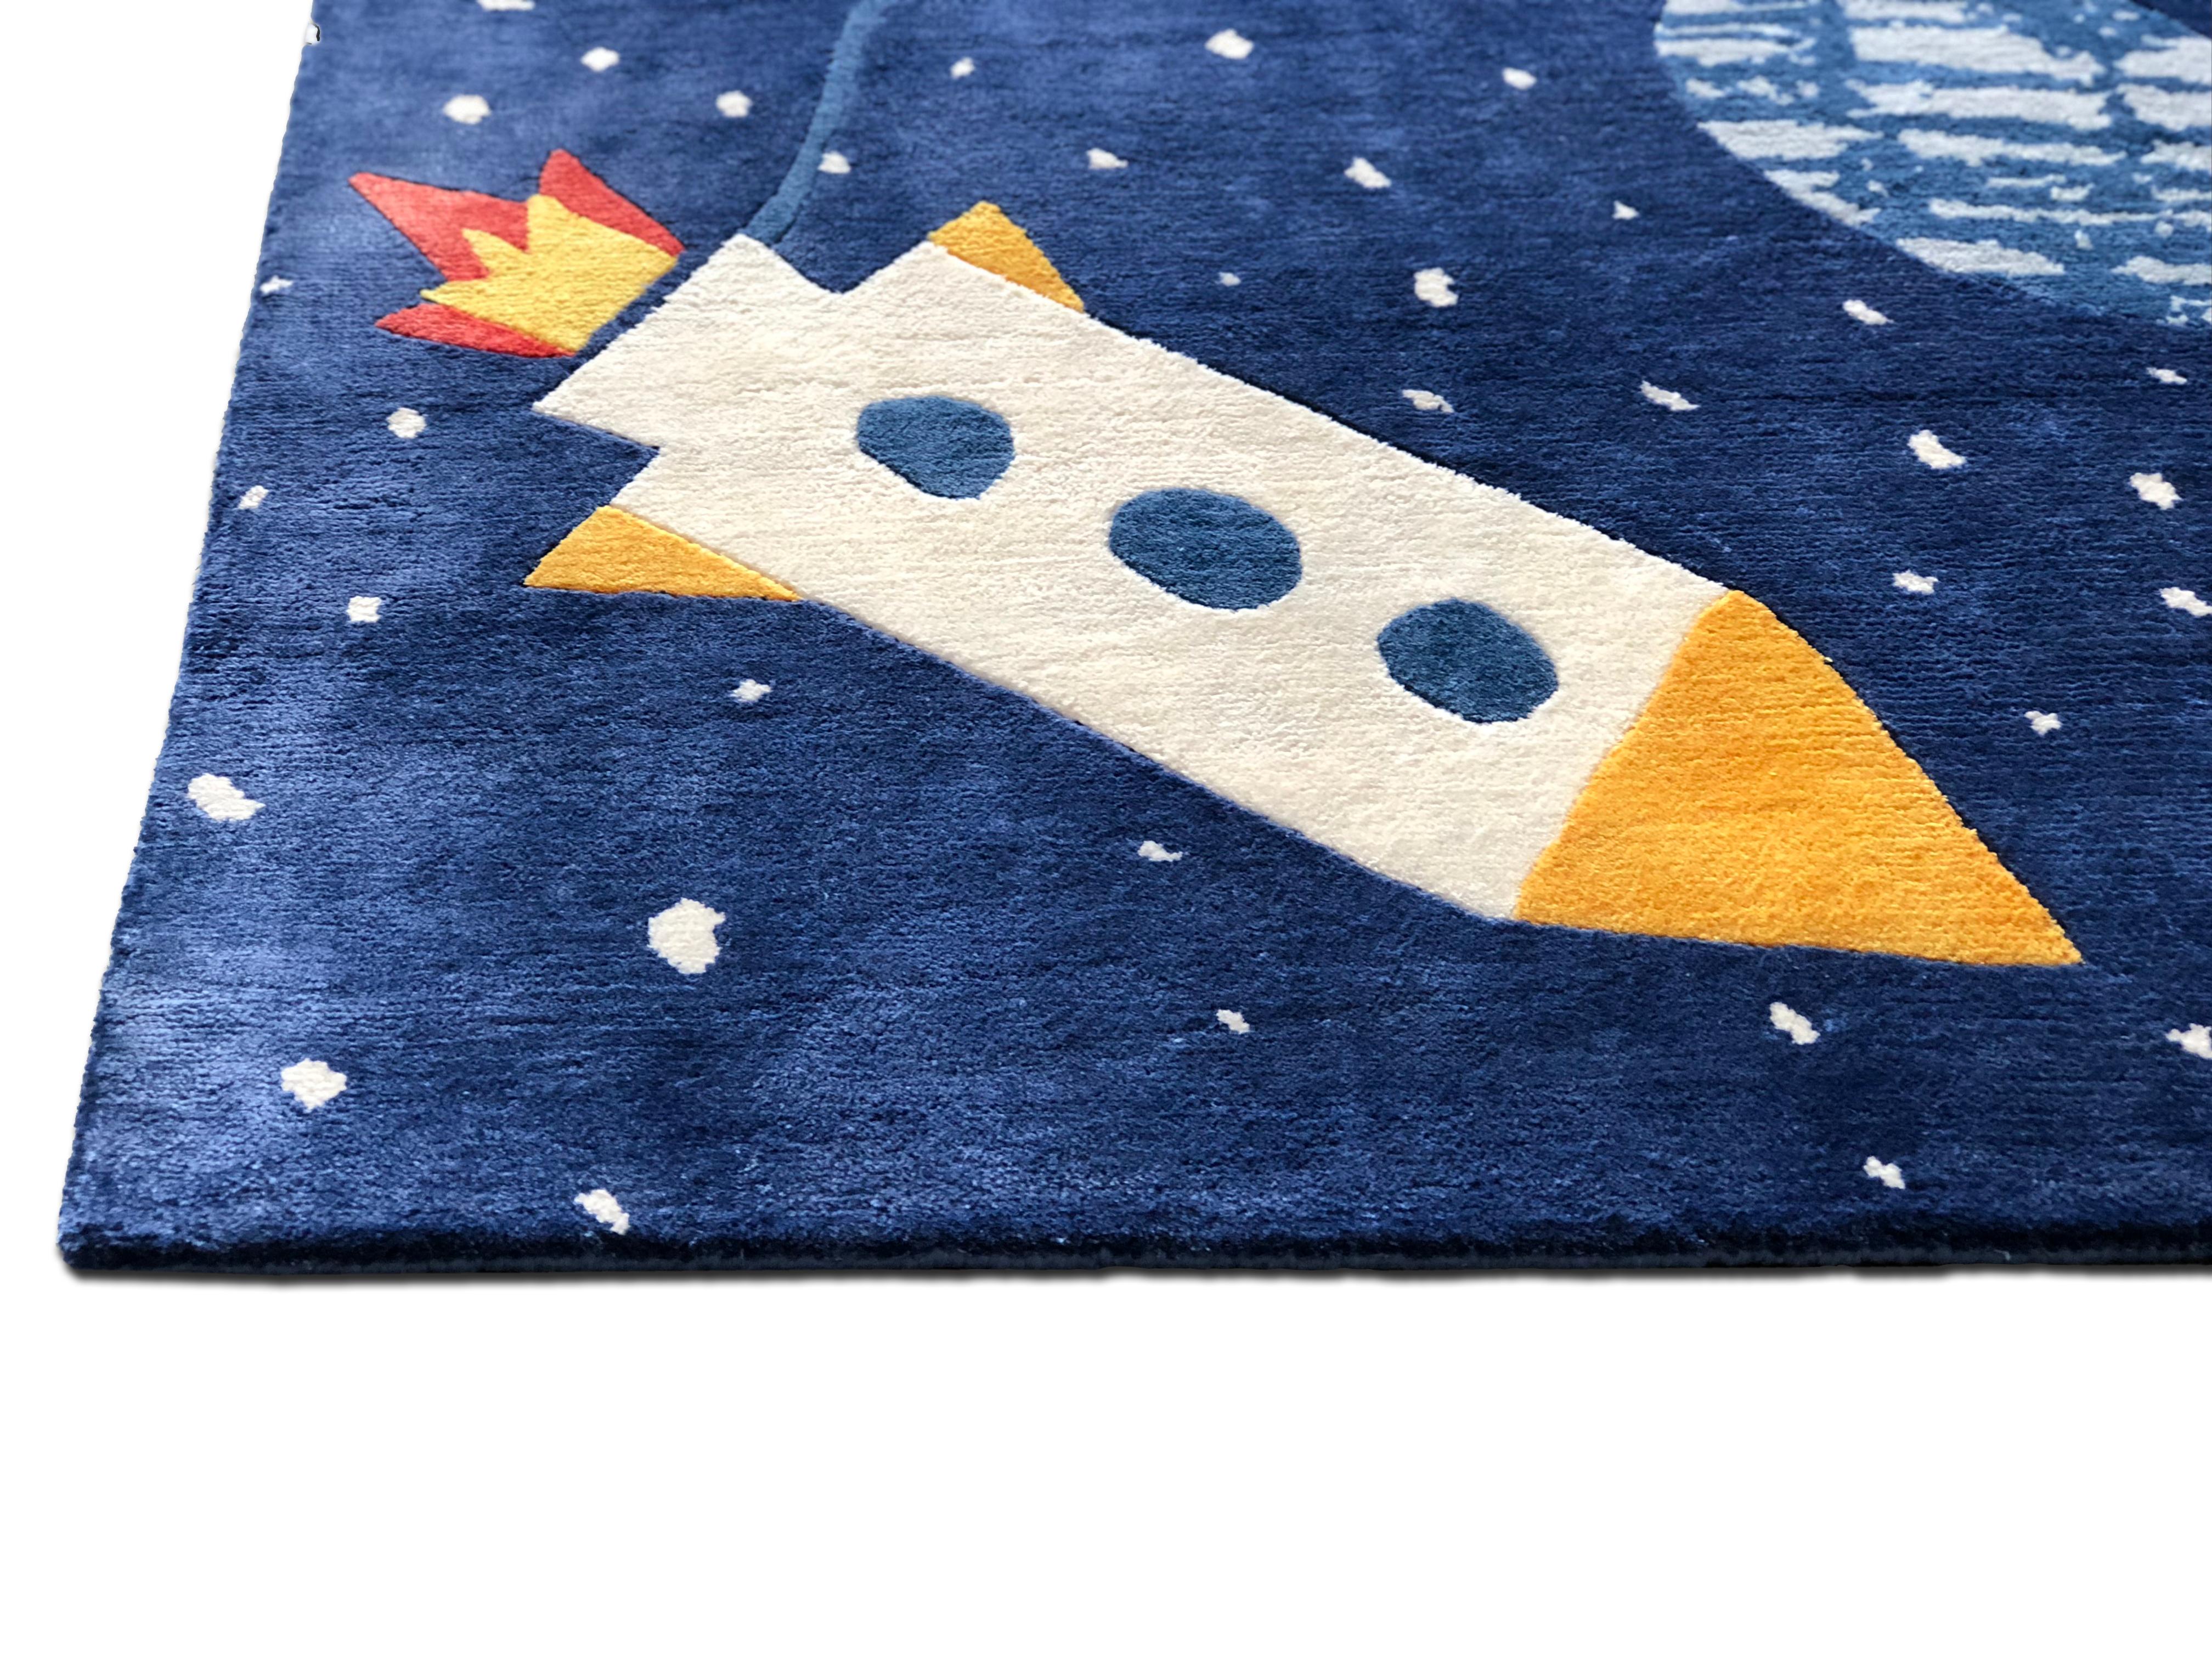 Hand-Knotted SPACE ACE RUG by Daria Solak, Hand Knotted, 100% New Zealand Wool 150 x 190 cm For Sale